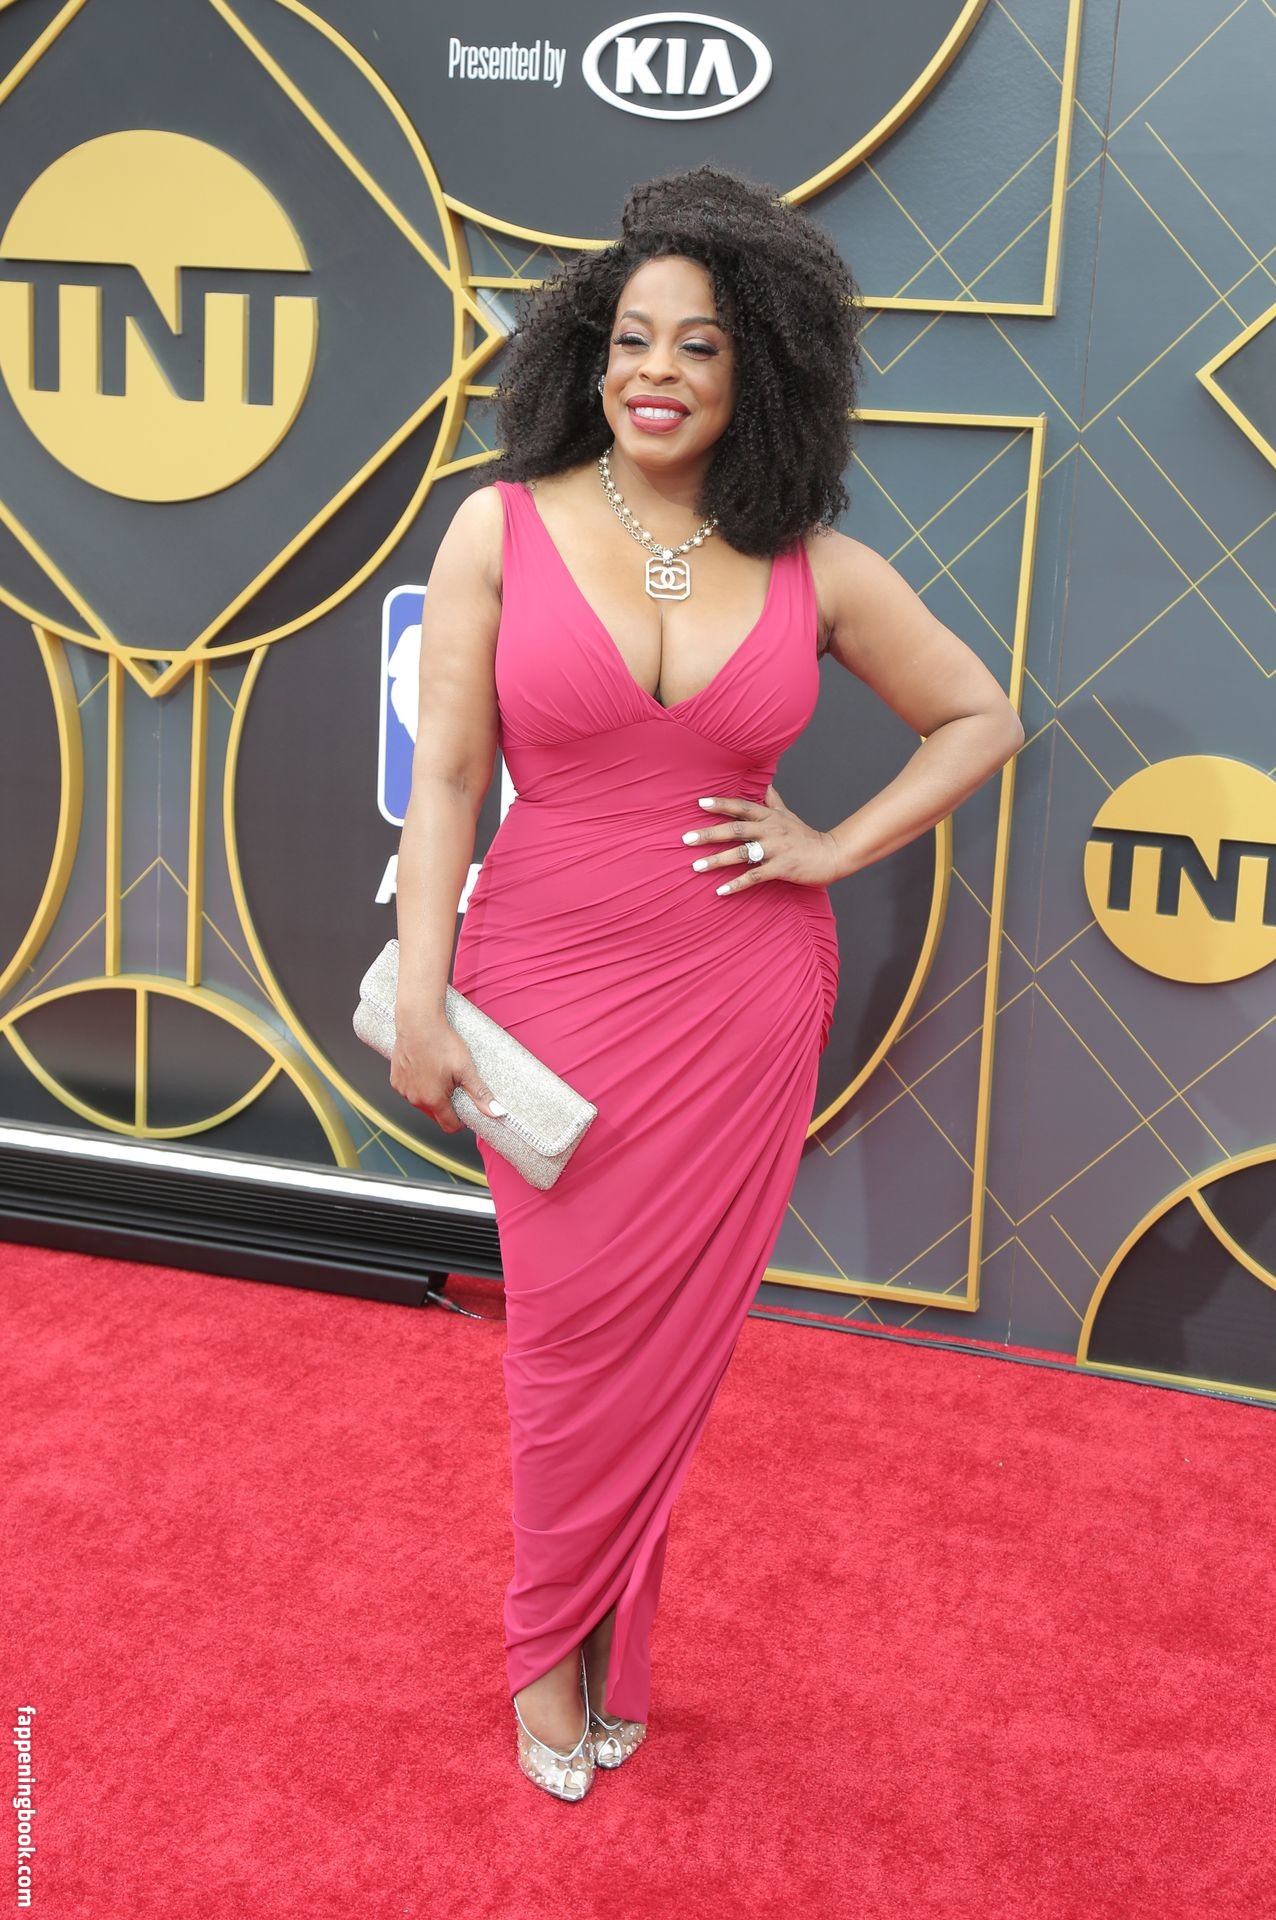 Niecy Nash Nude, Sexy, The Fappening, Uncensored - Photo 